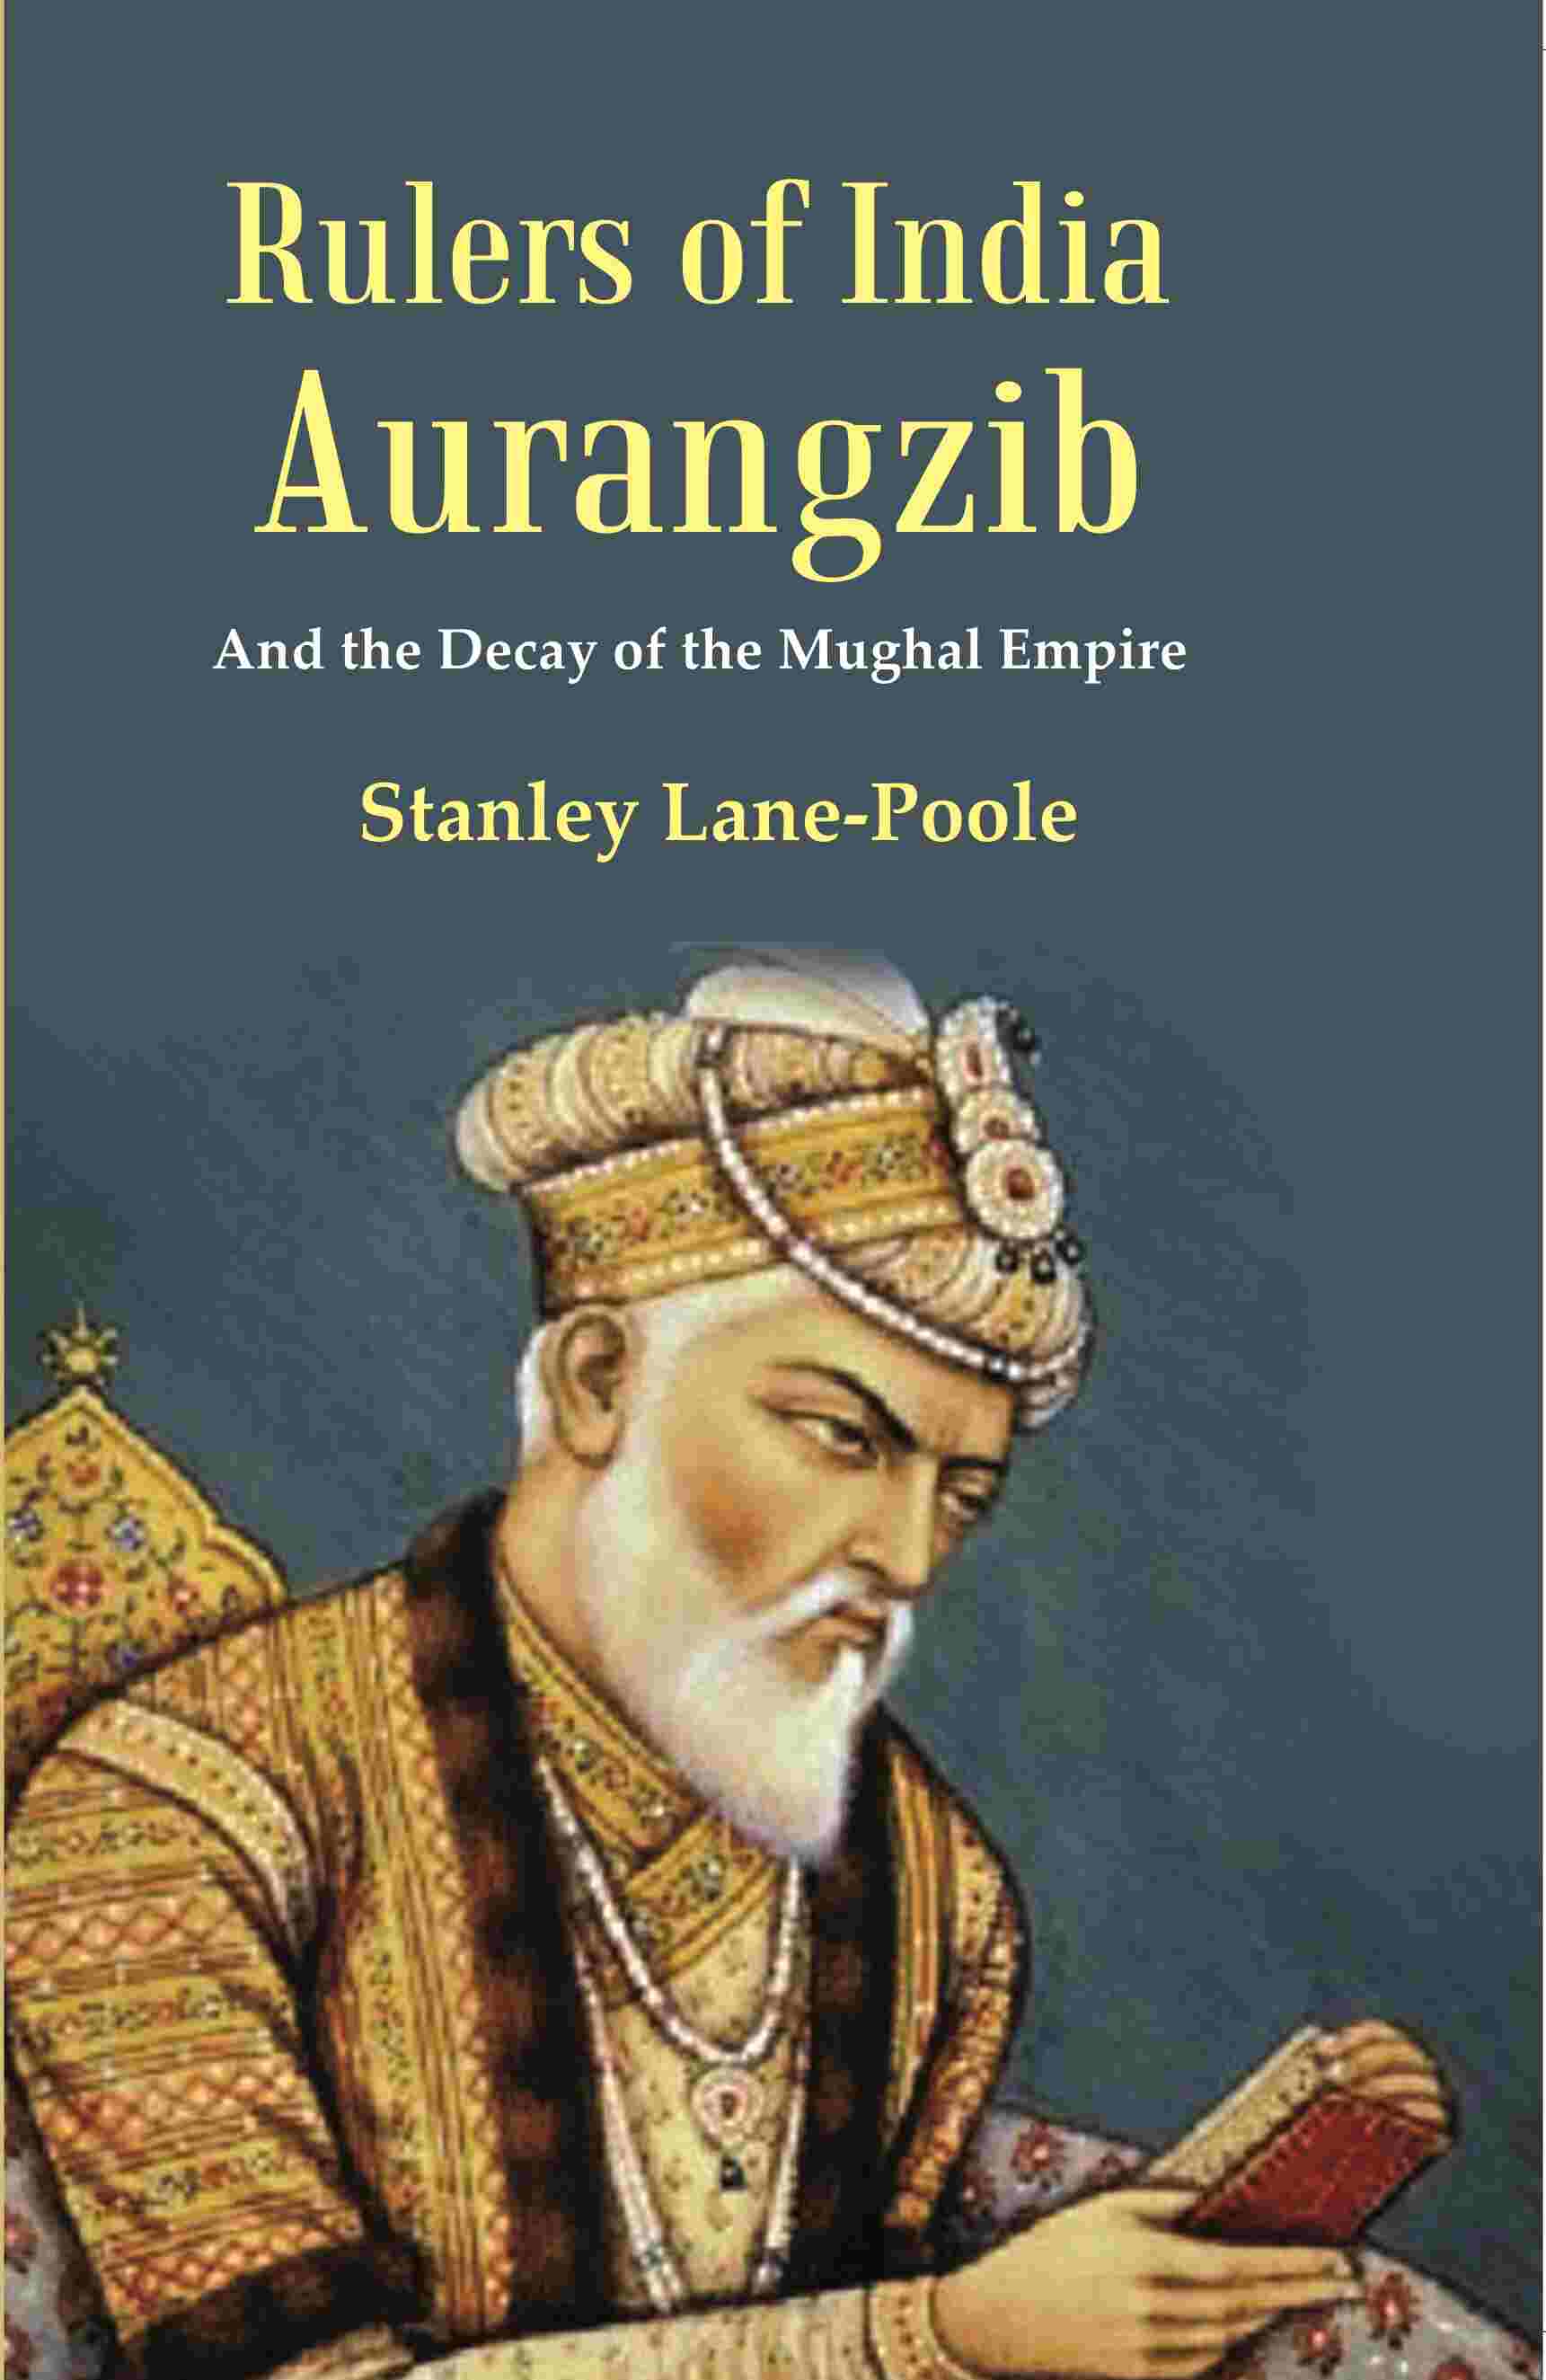 Rulers of India Aurangzib: And the Decay of the Mughal Empire